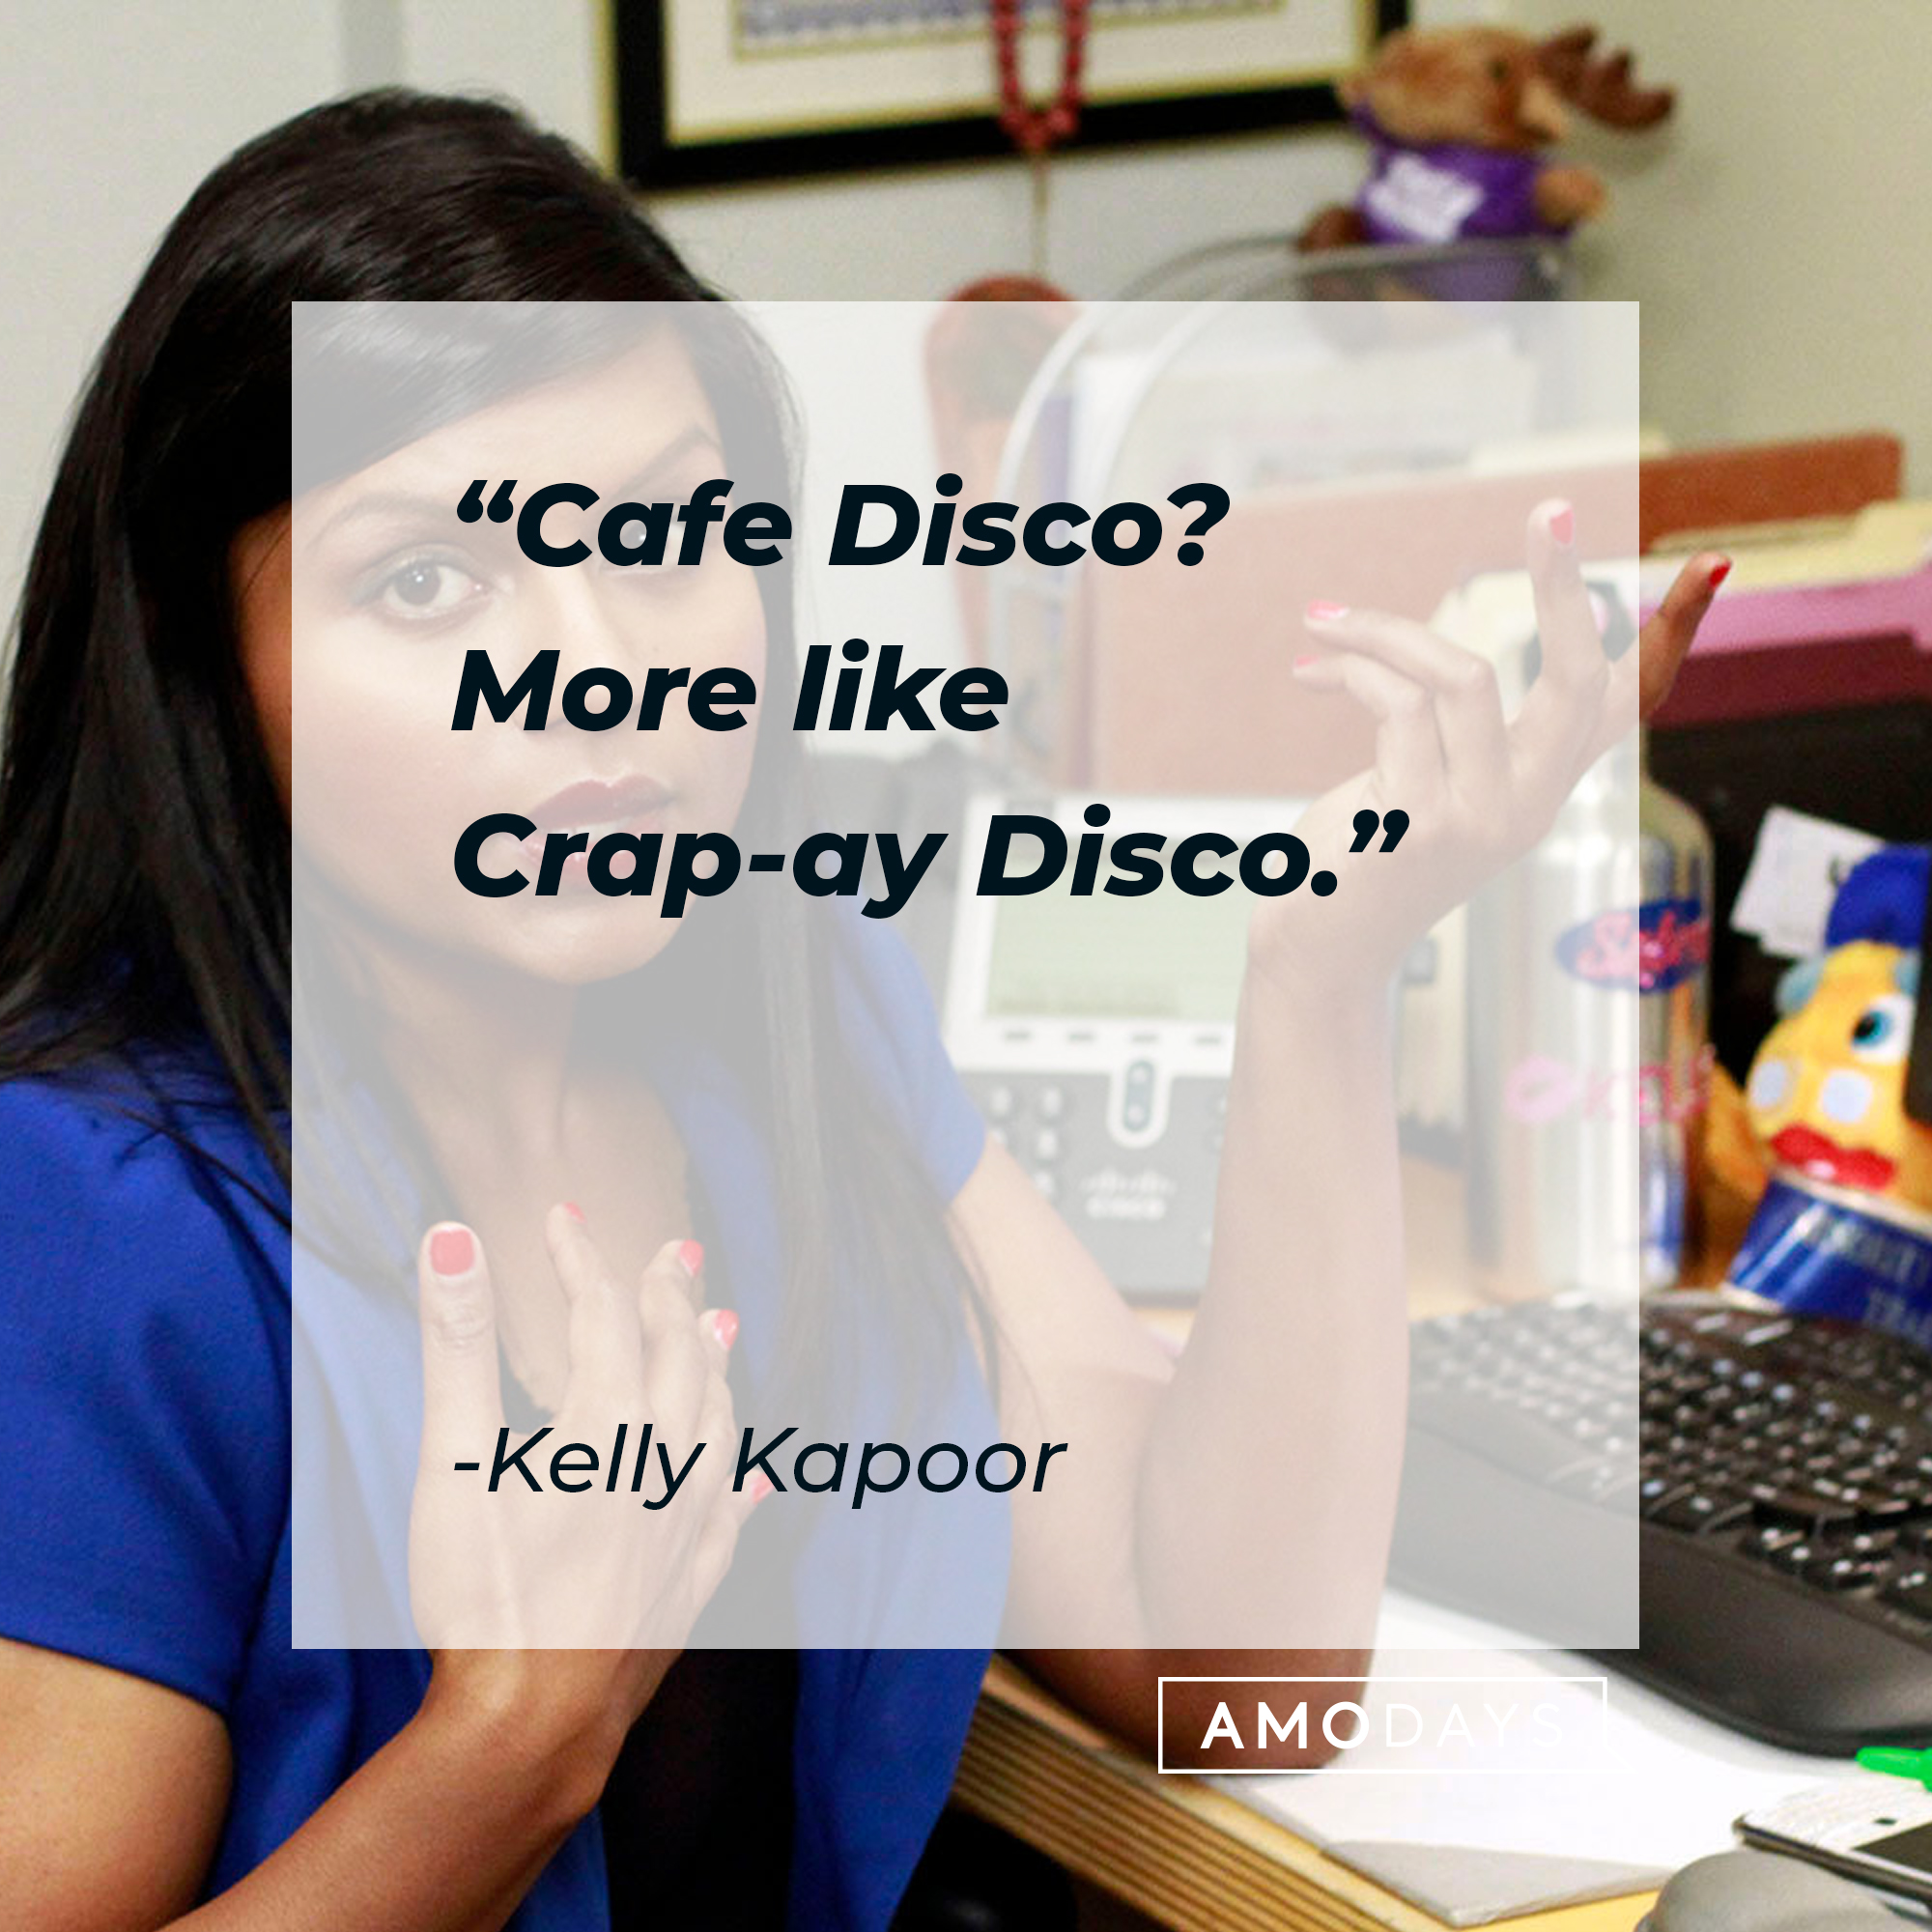 Kelly Kapoor's quote: "Cafe Disco? More like Crap-ay Disco." | Source: facebook.com/TheOfficeTV